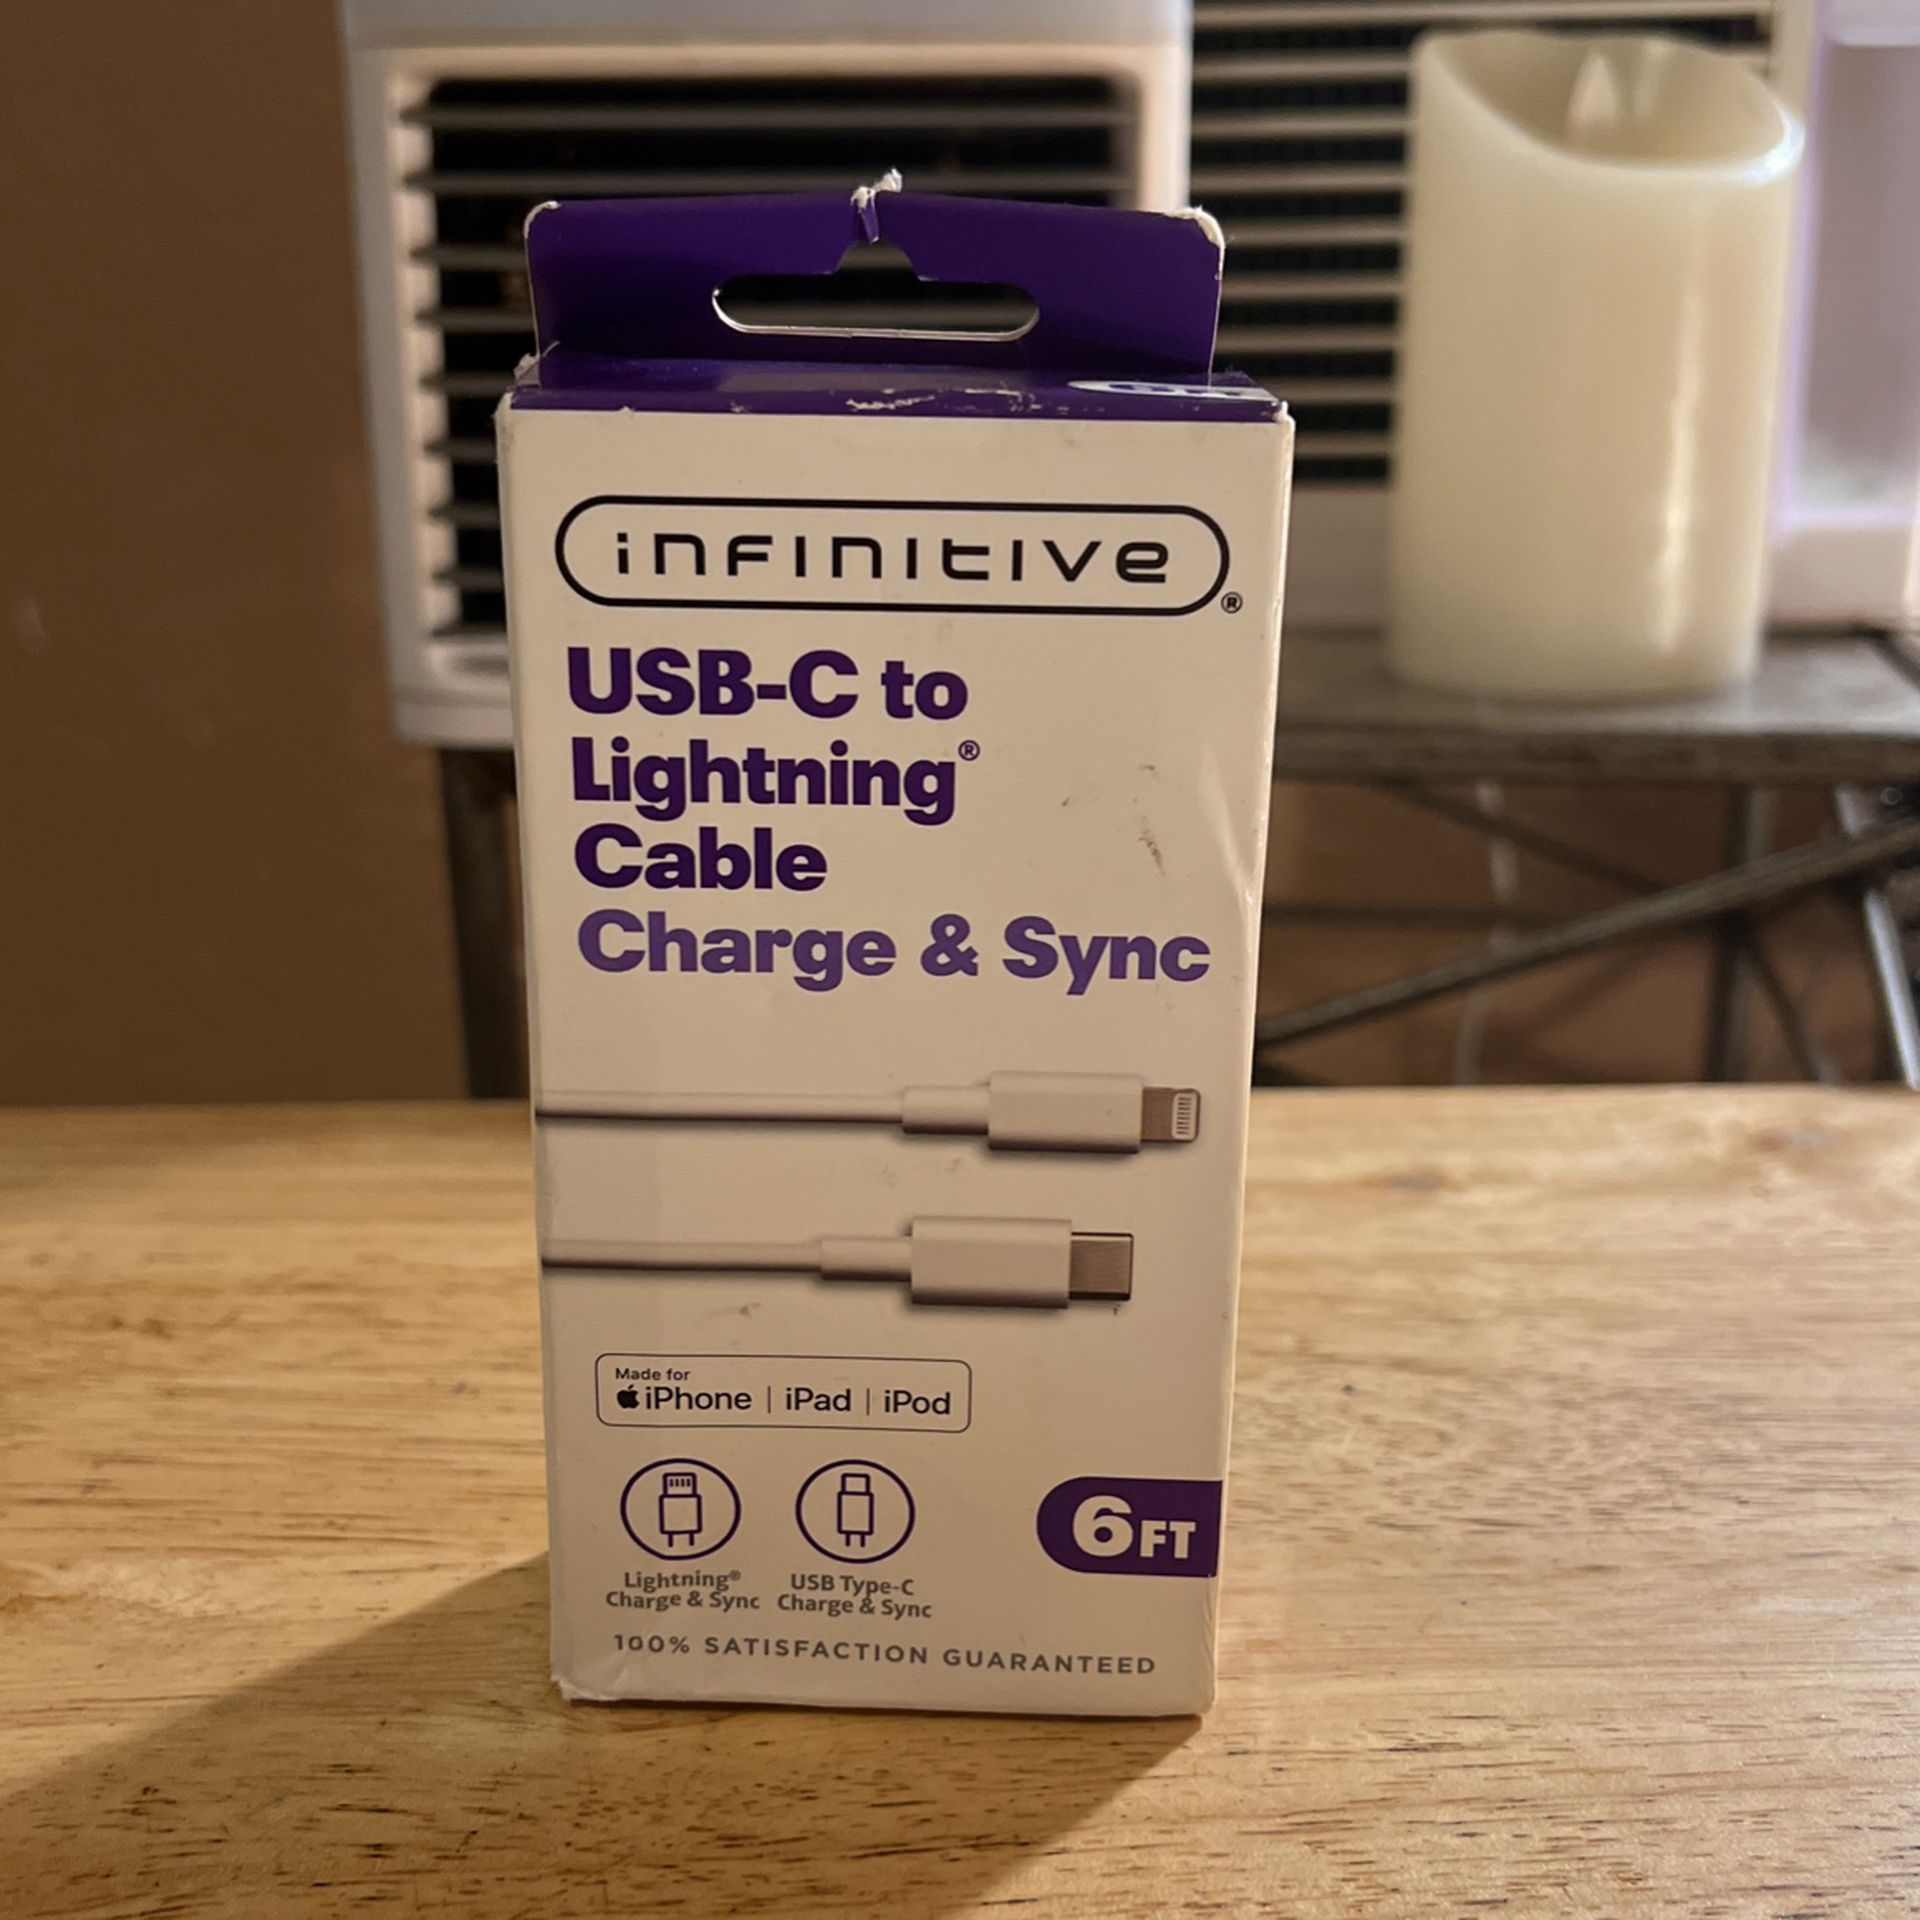 USB-c To Lightning Cable Charge And Sync 6 Ft For iPhone iPod And iPad $6 Firm C My Other Chargers On My Page Ty